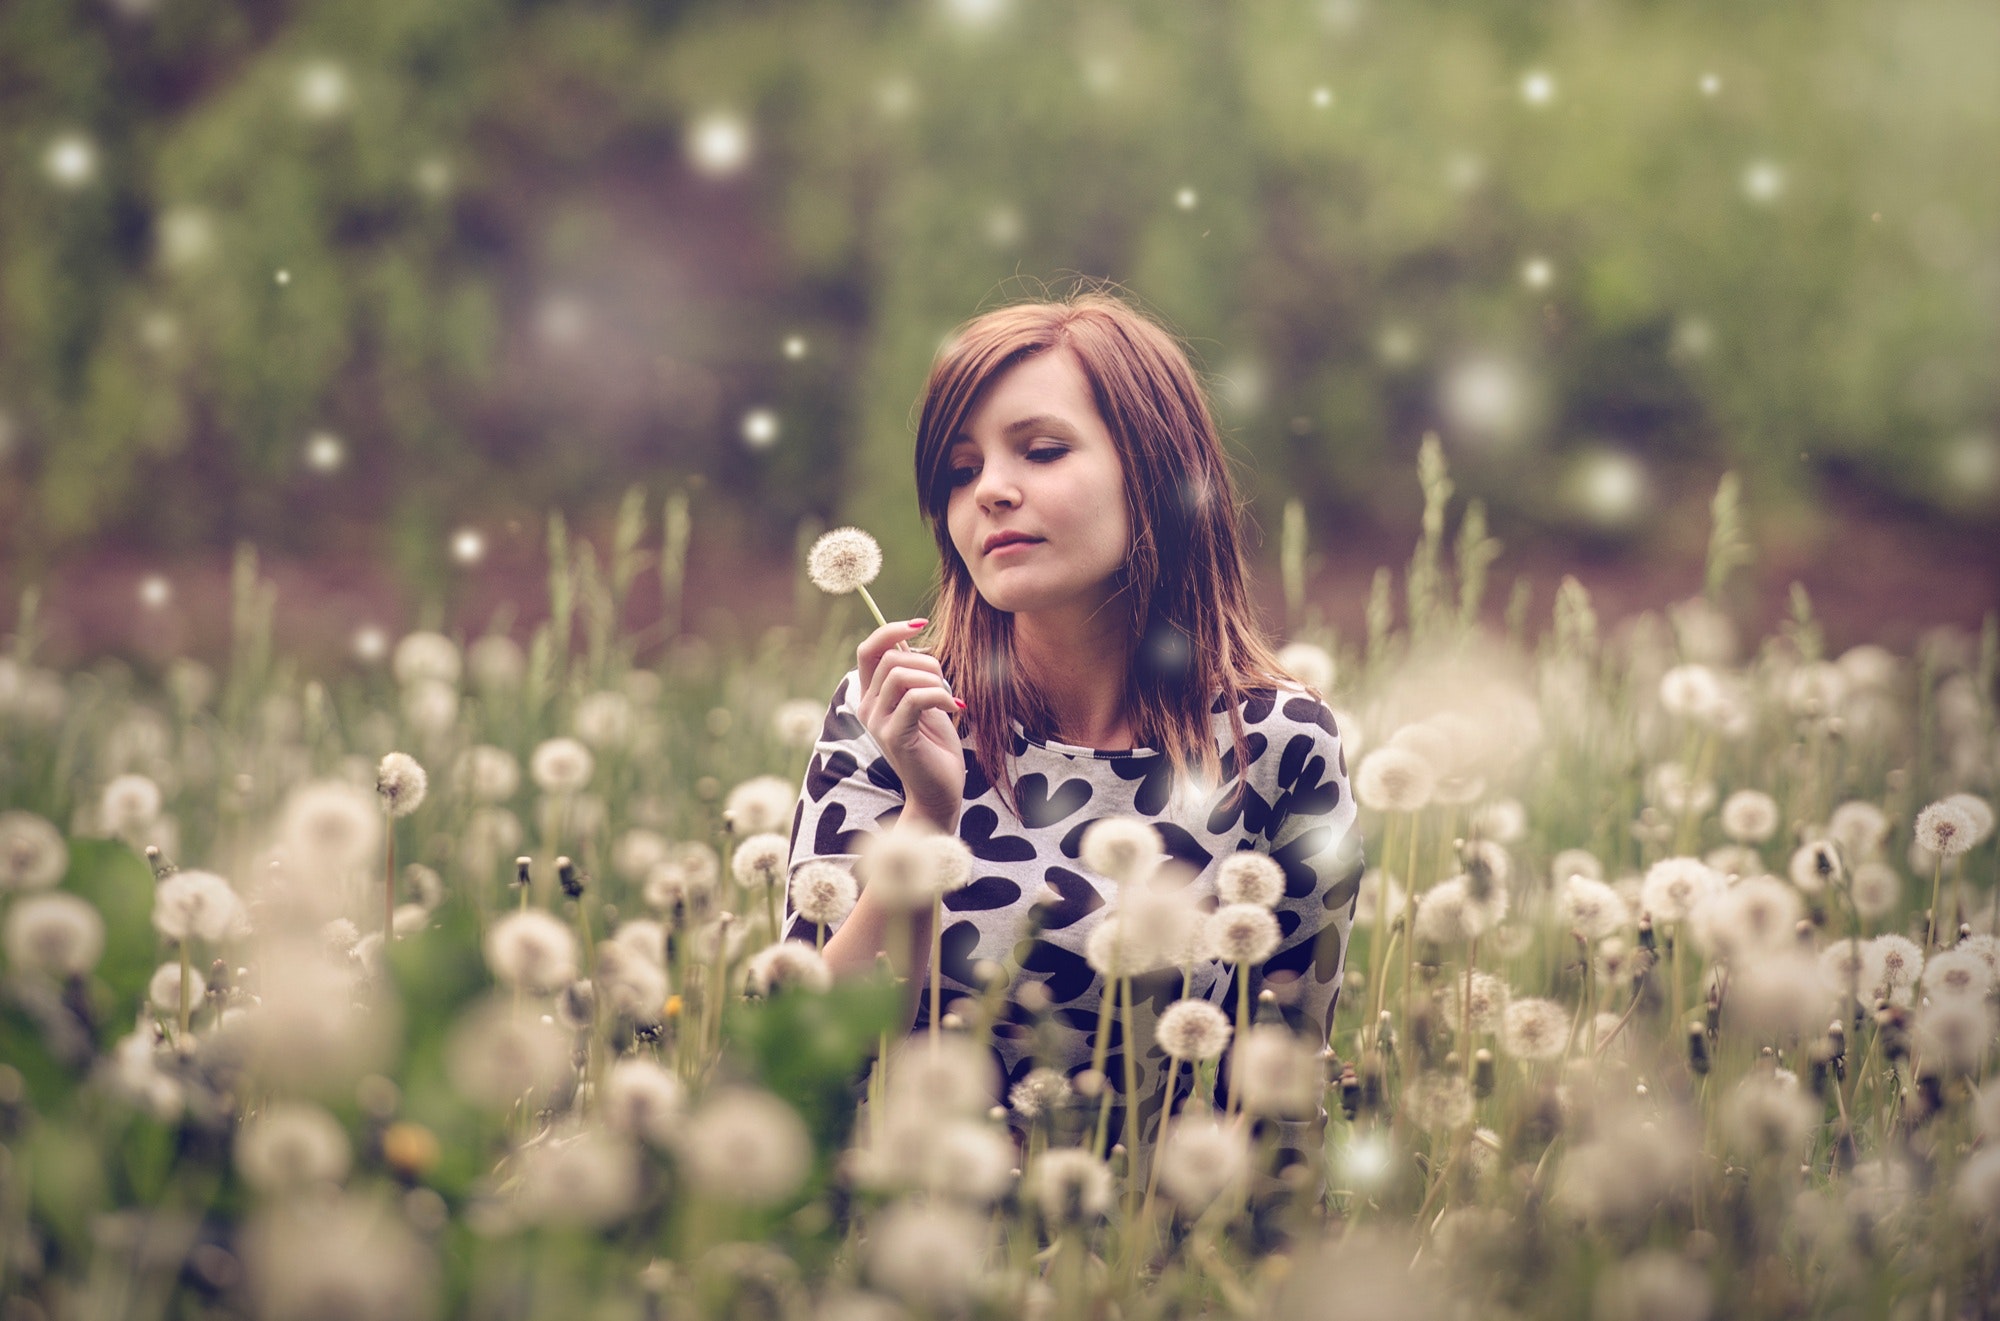 Woman sitting in a field of flowers photo